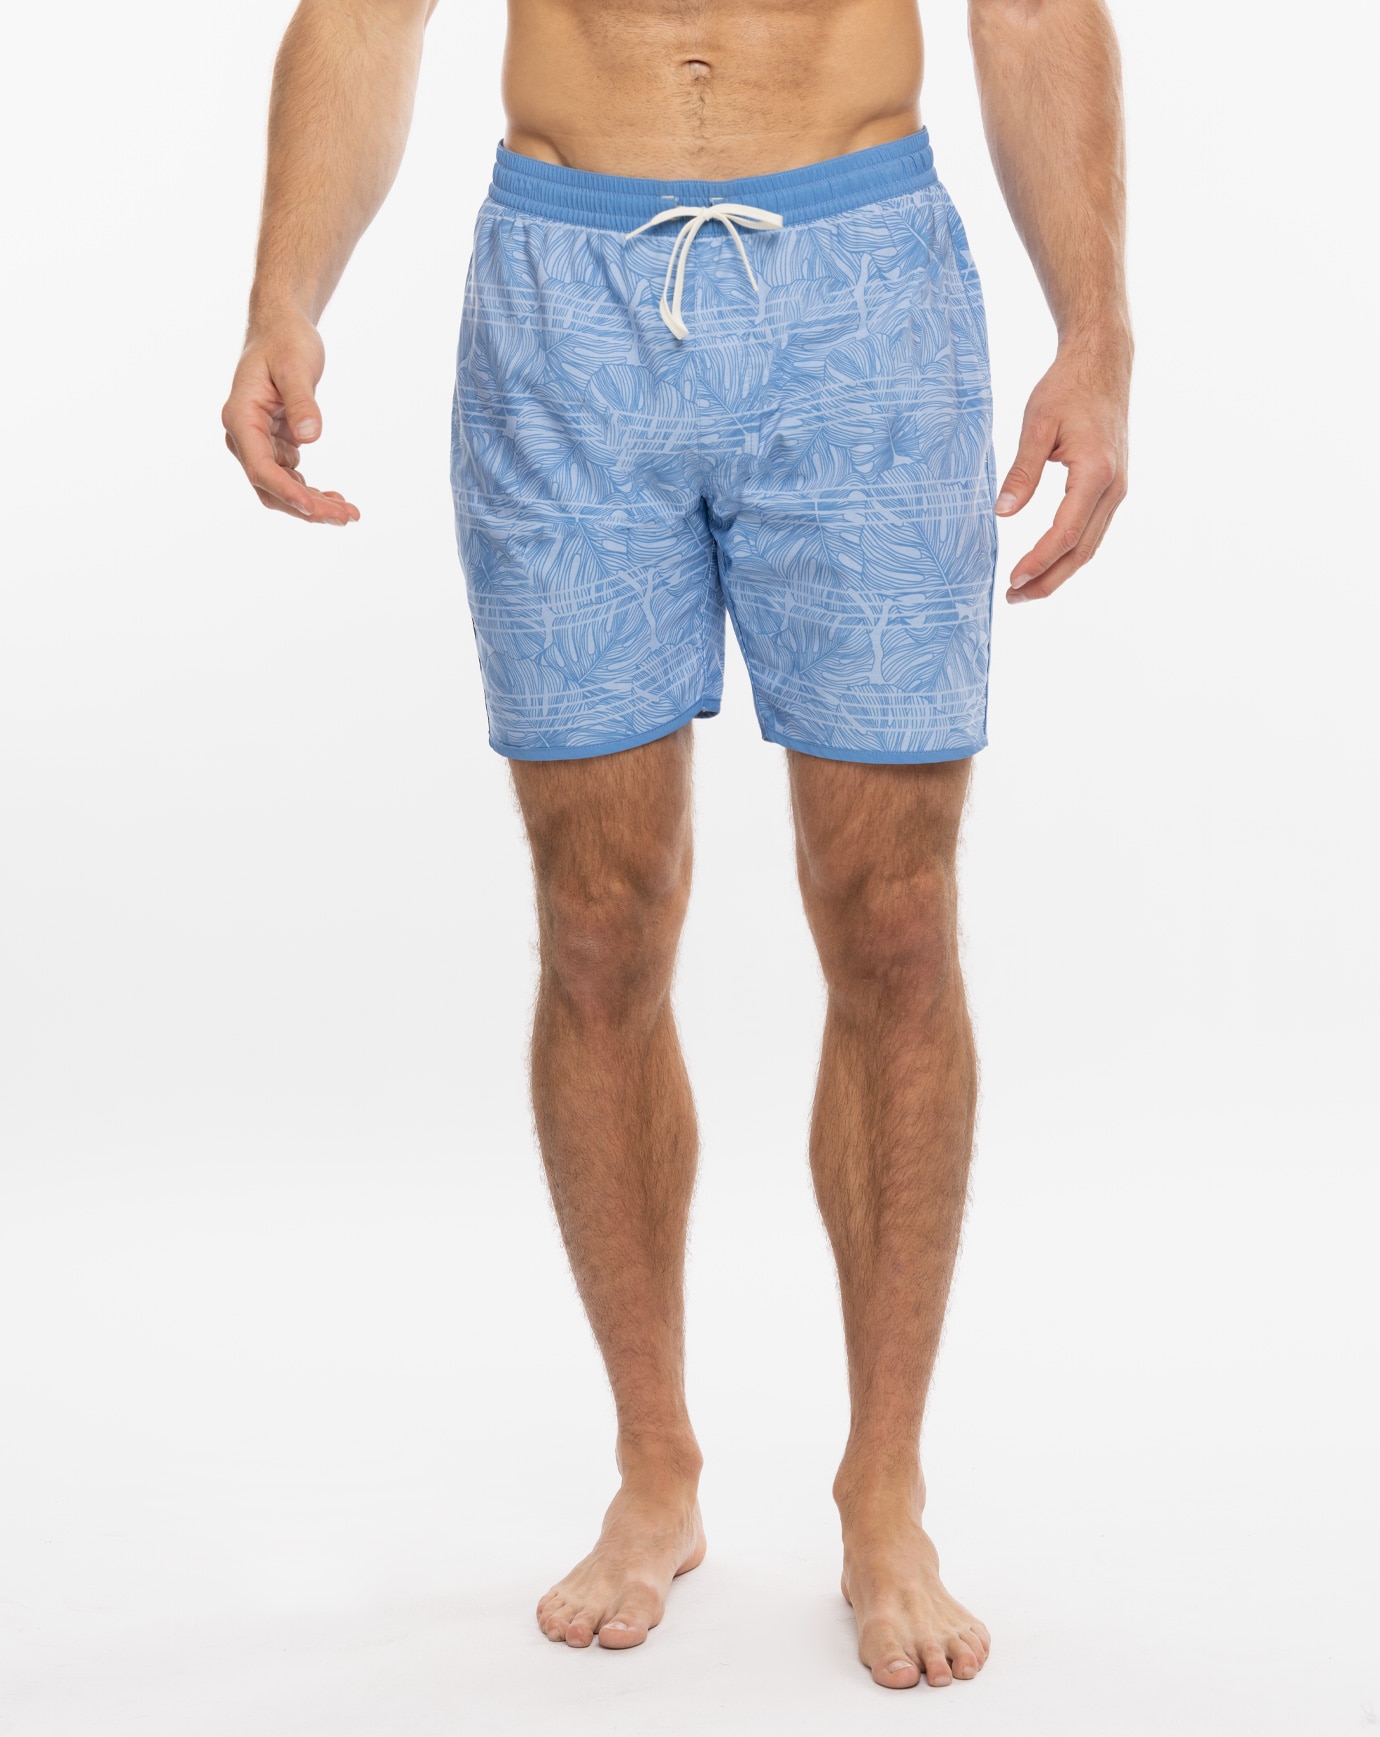 Related Product - PERTH E-WAIST BOARDSHORT